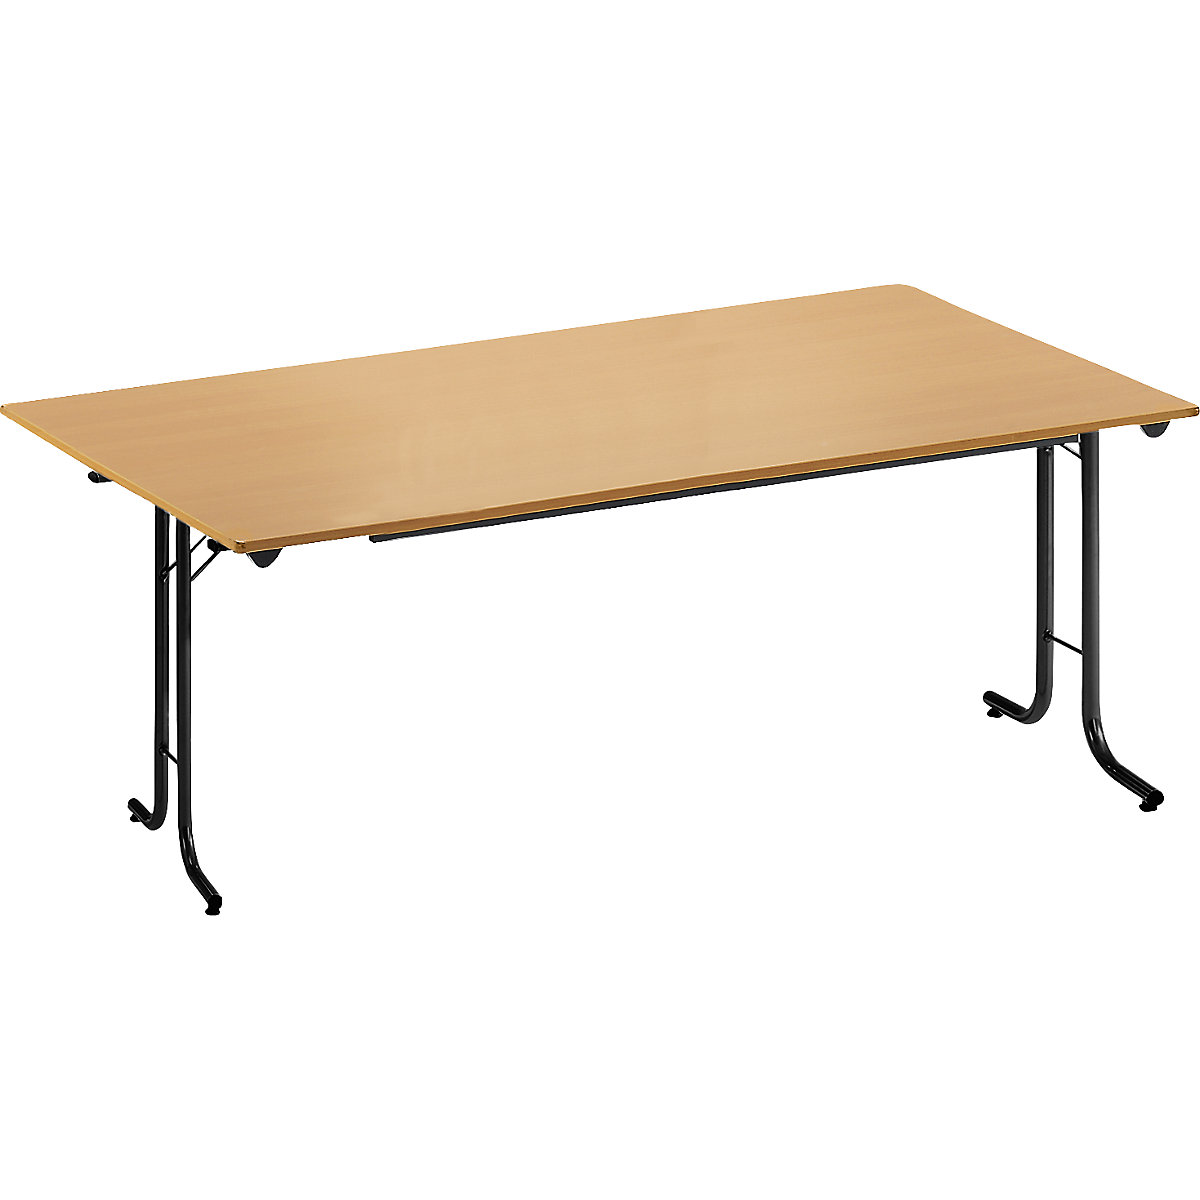 Folding table, with rounded edges, round tubular frame, rectangular top, 1600 x 800 mm, black frame, beech finish tabletop-11